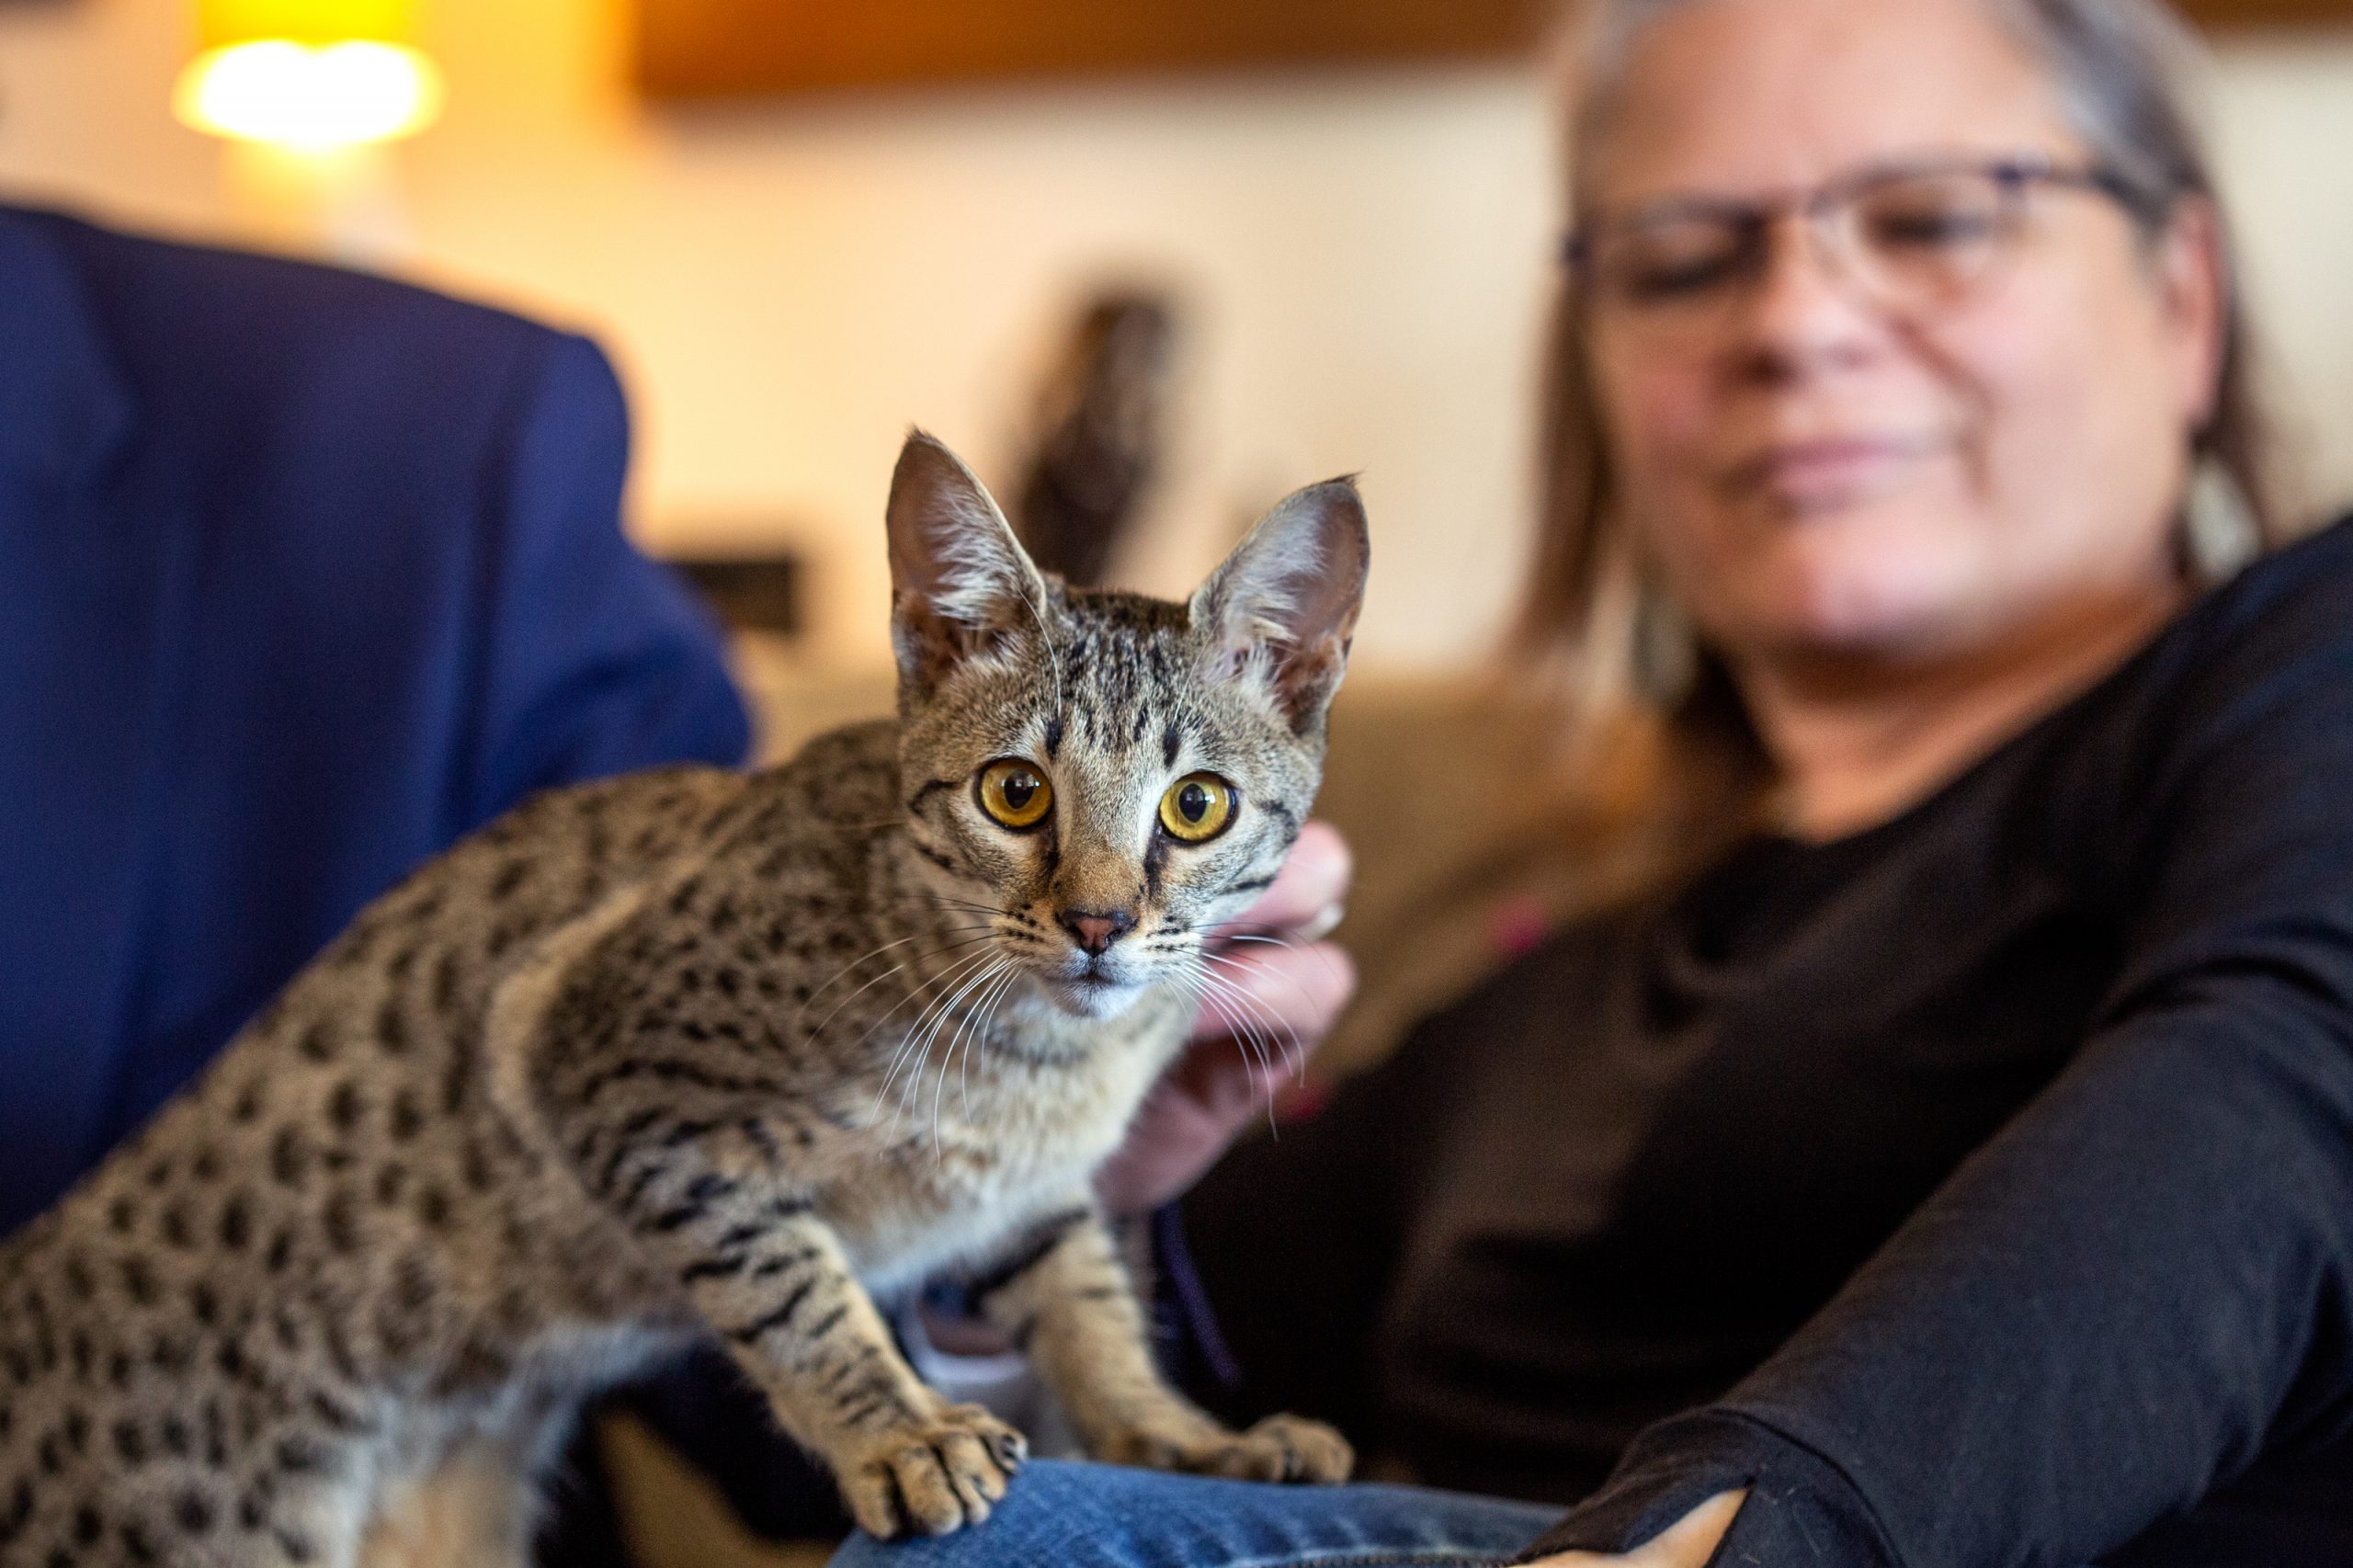  Savannah cats became a registered breed in 2001. Flavia says that Mimi is very sociable, and she likes to be outdoors and take walks. She plays fetch, runs fast like a cheetah through the home, and answers to a whistle! 